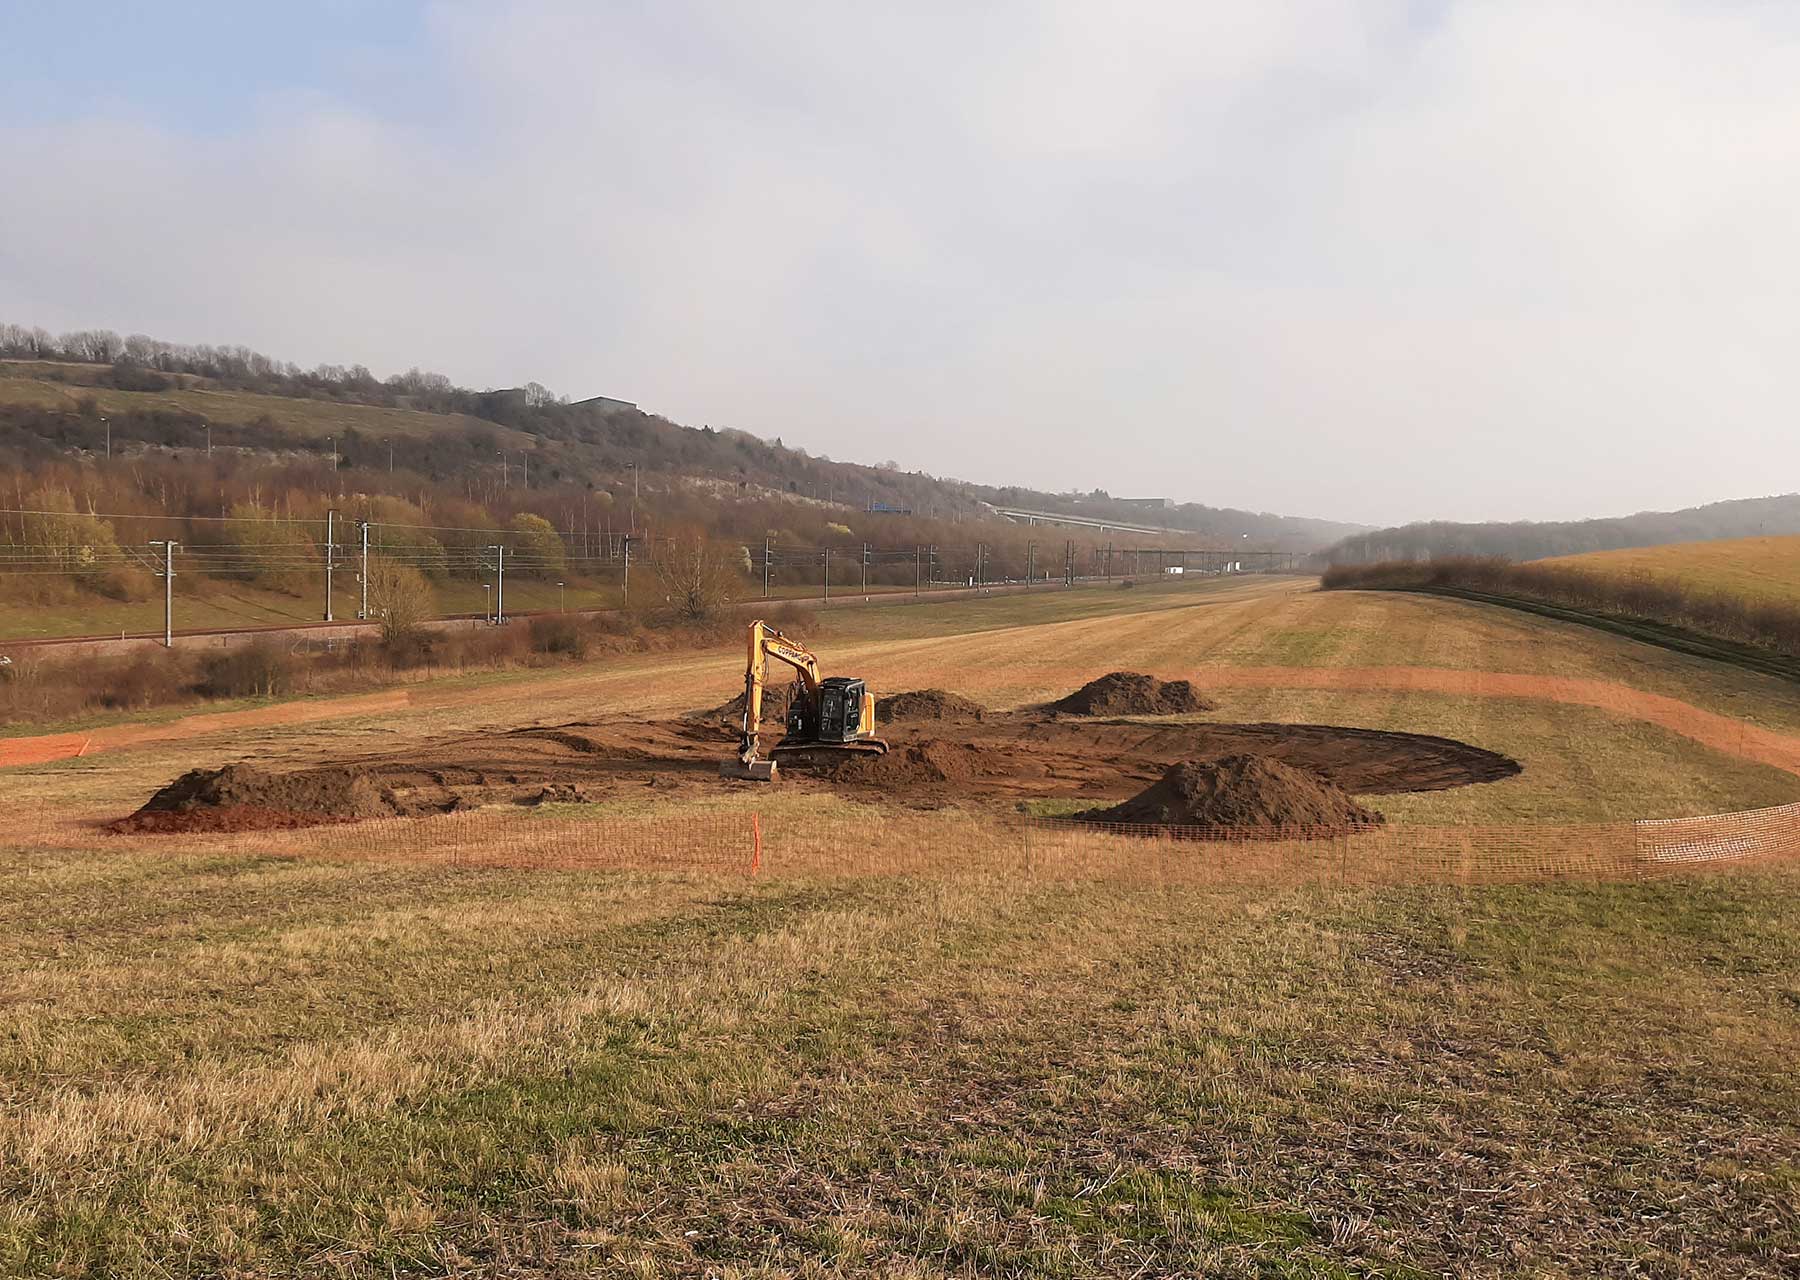 Waterlands build, restore and repair lakes, ponds and water features: Dew ponds for Kent Wildlife Trust.